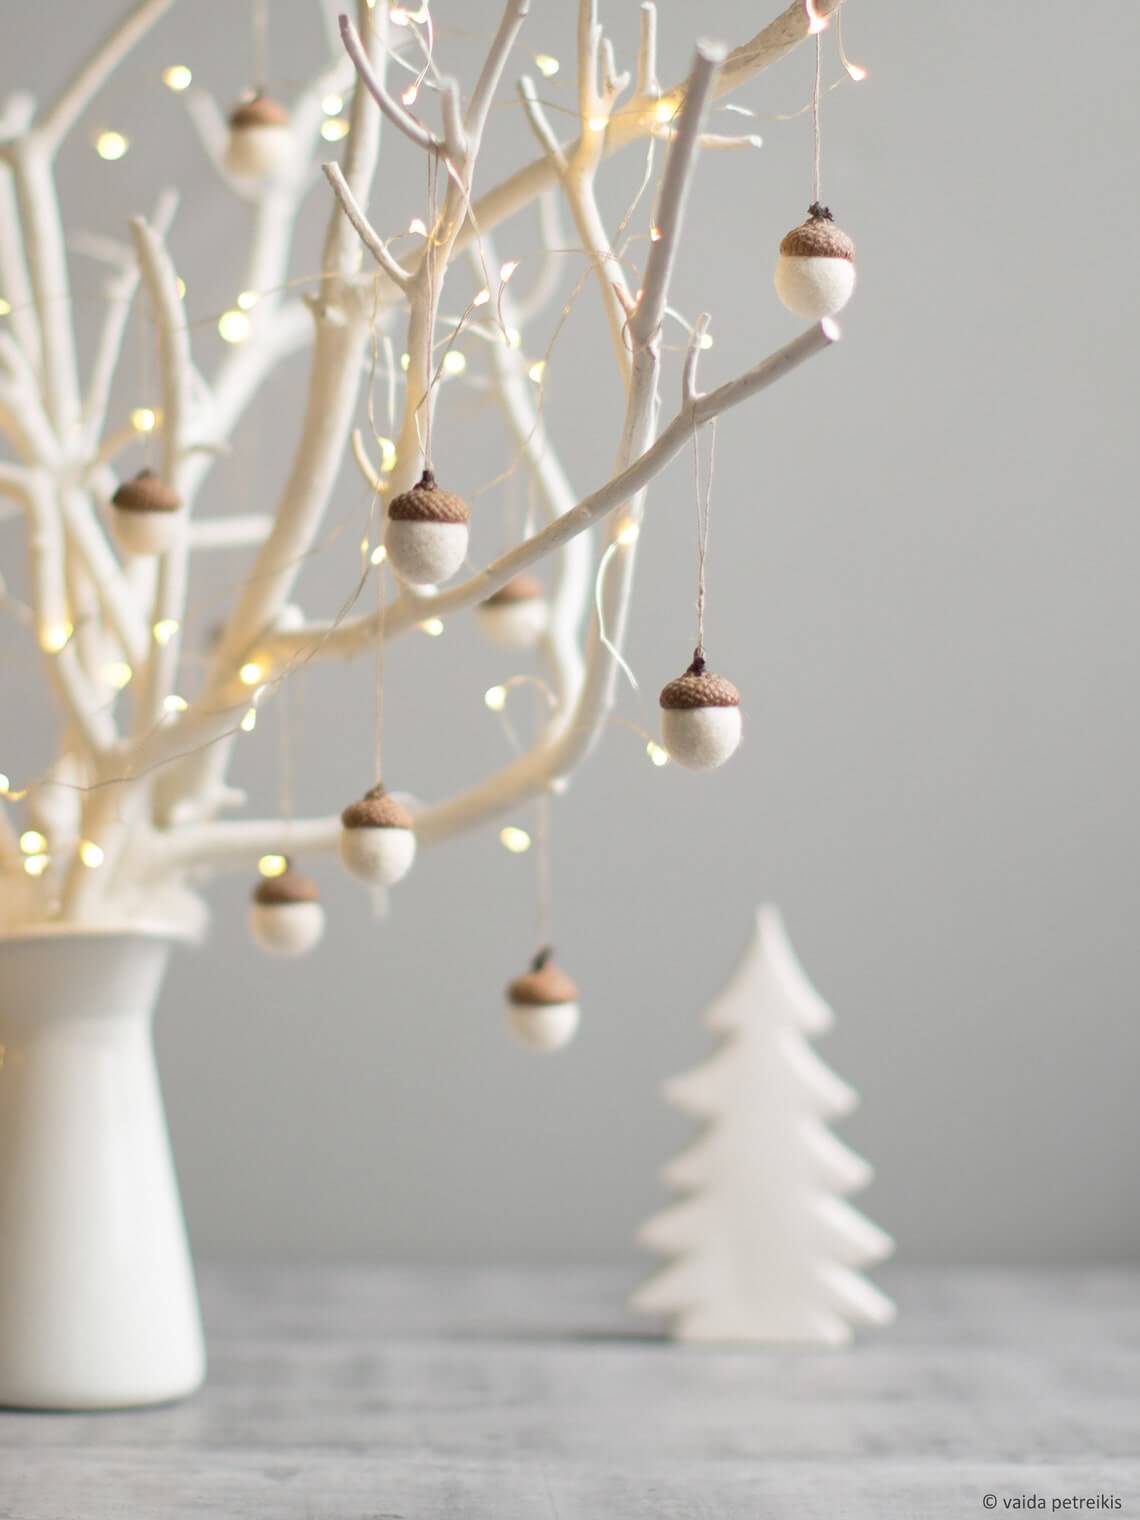 Suspended Acorn Ornaments Made from Natural Materials